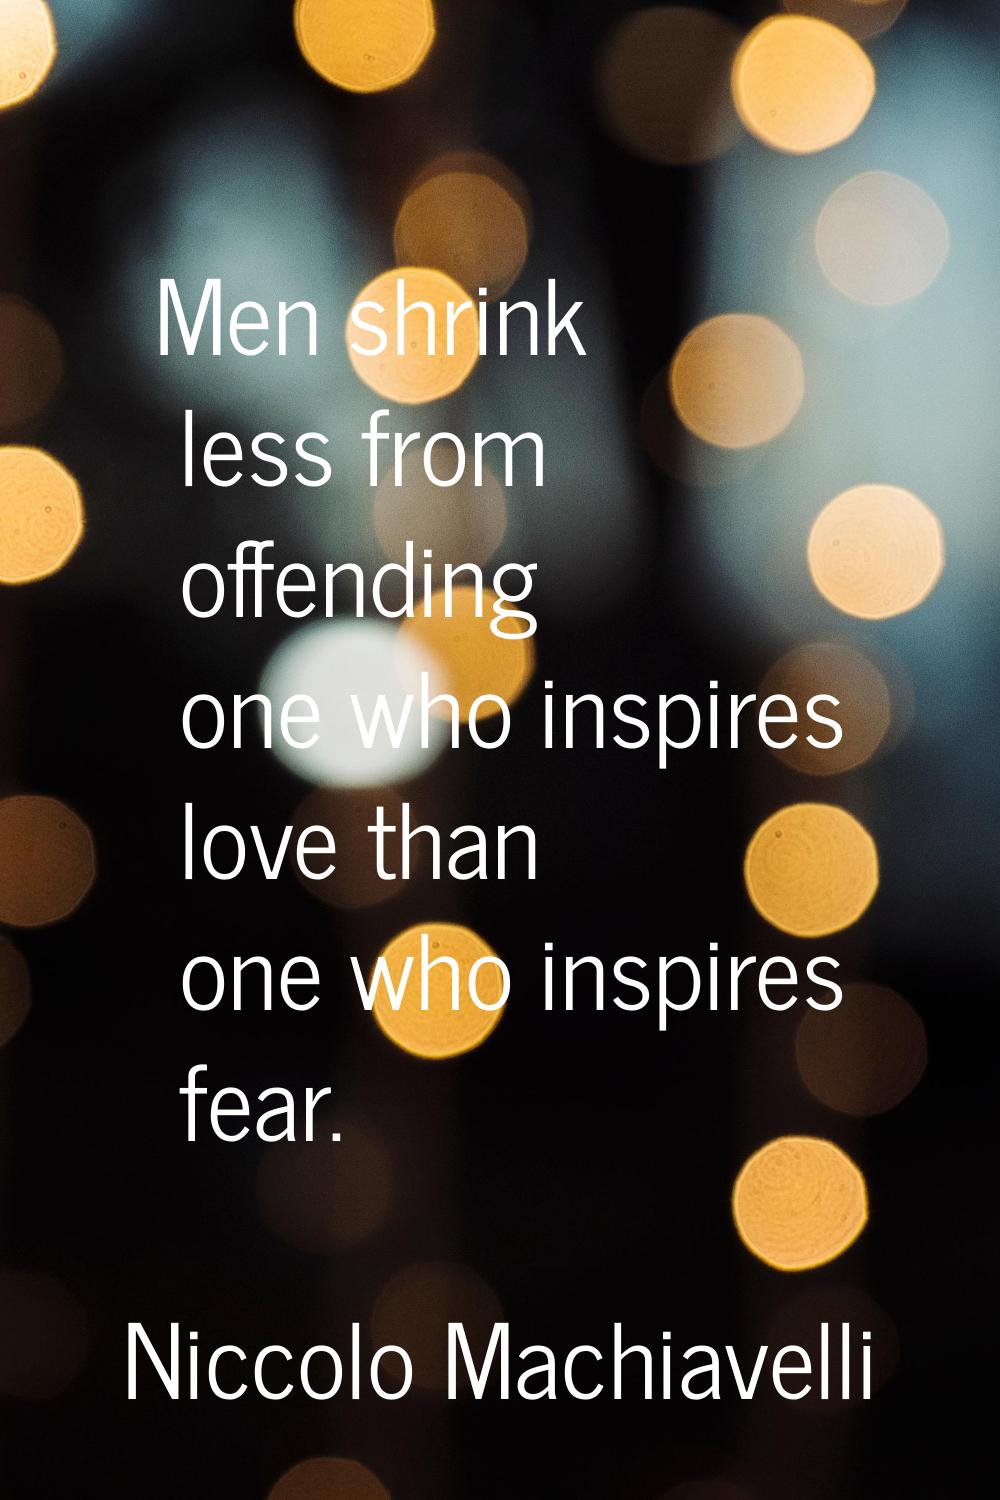 Men shrink less from offending one who inspires love than one who inspires fear.